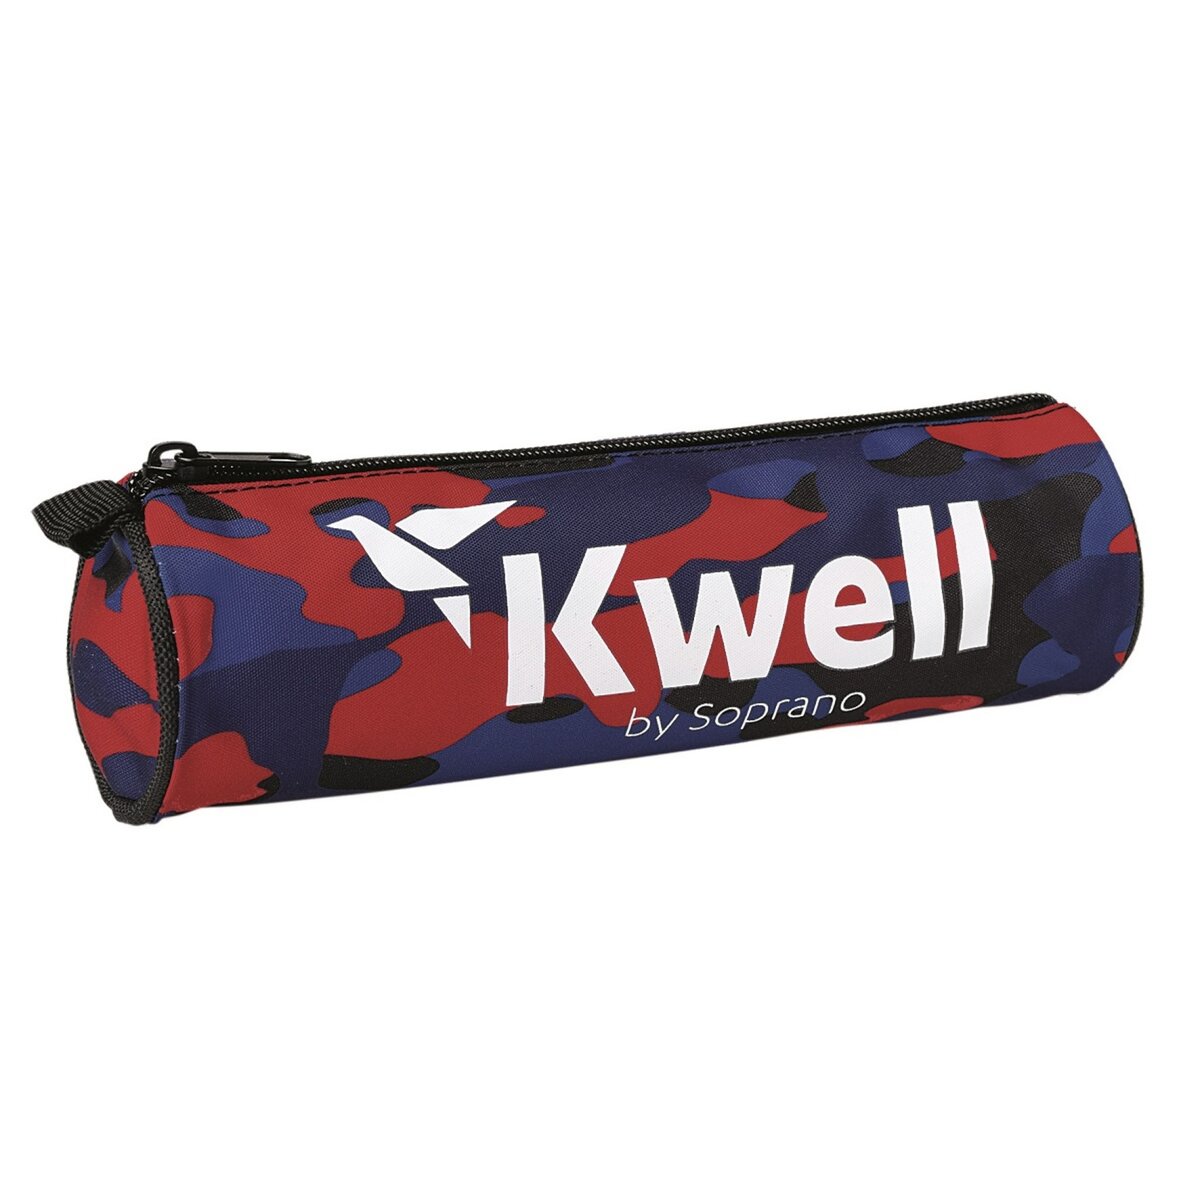 kwell Trousse ronde - 1 compartiment - 22x6cm - KWELL - Décor camouflage rouge/bleu